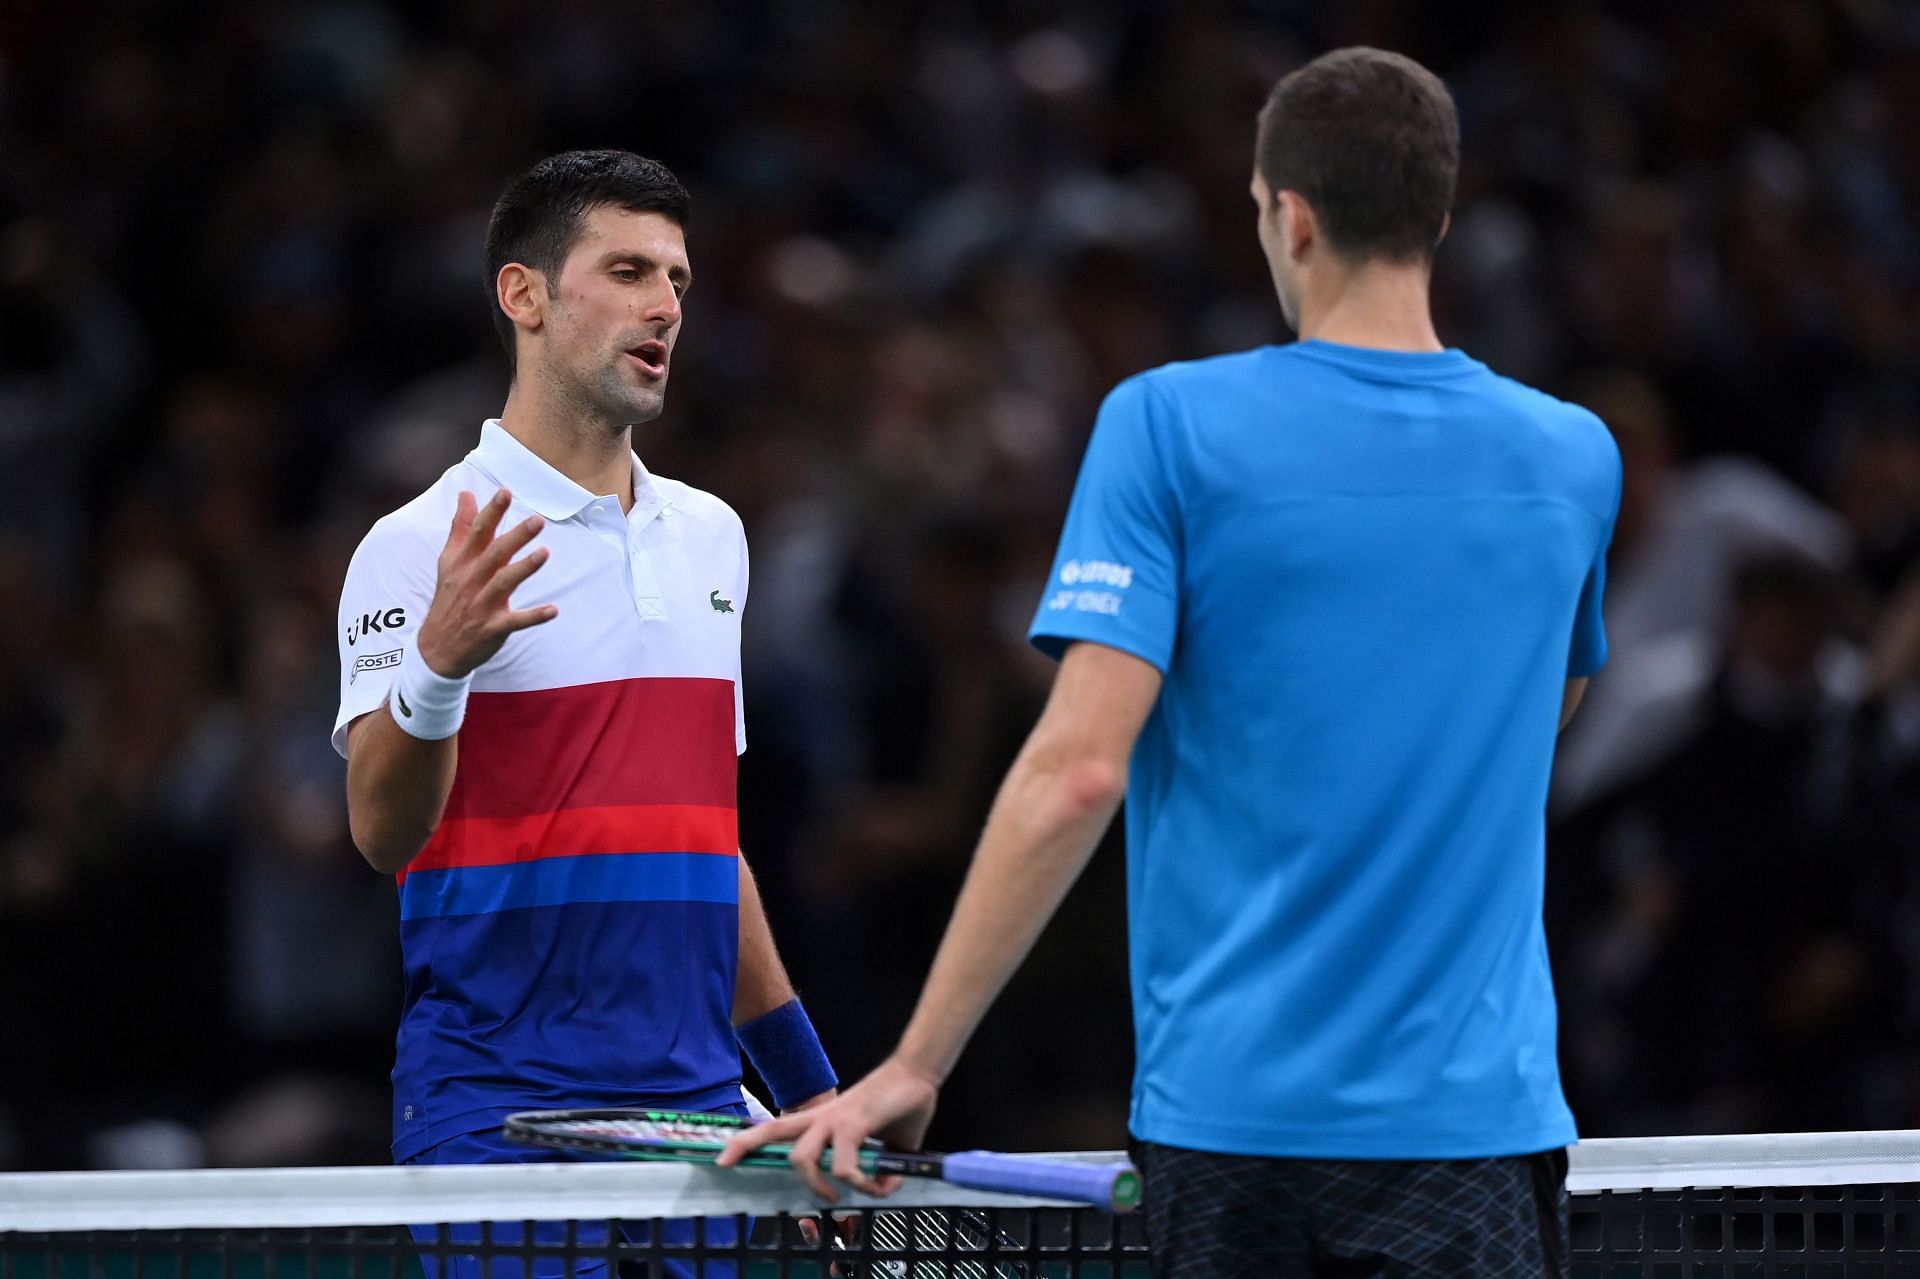 Noavk Djokovic and Hubert Hurkacz sharing an exchange at the net following their encounter in the 2021 Paris Masters